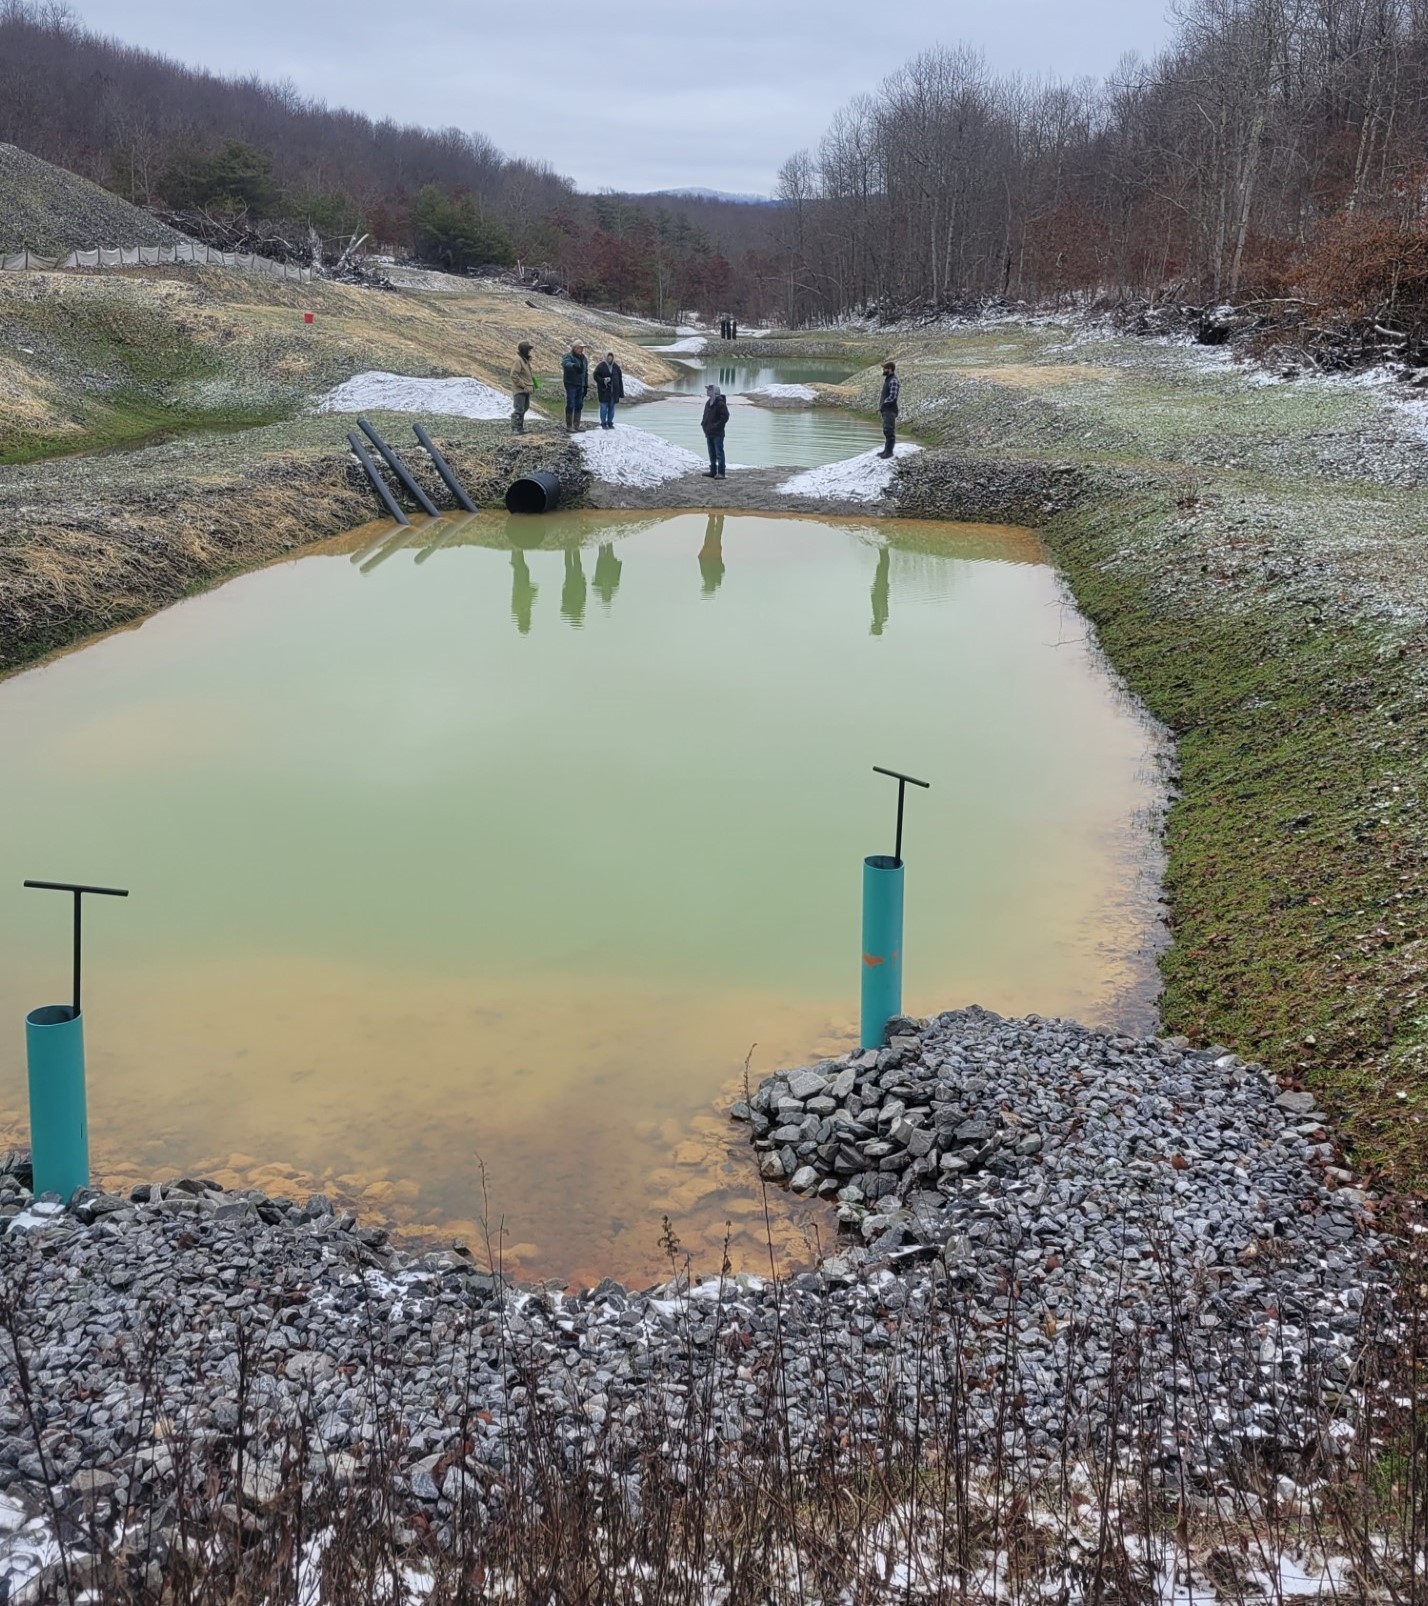 Acid mine drainage reclamation project, showing three ponds and people in the background